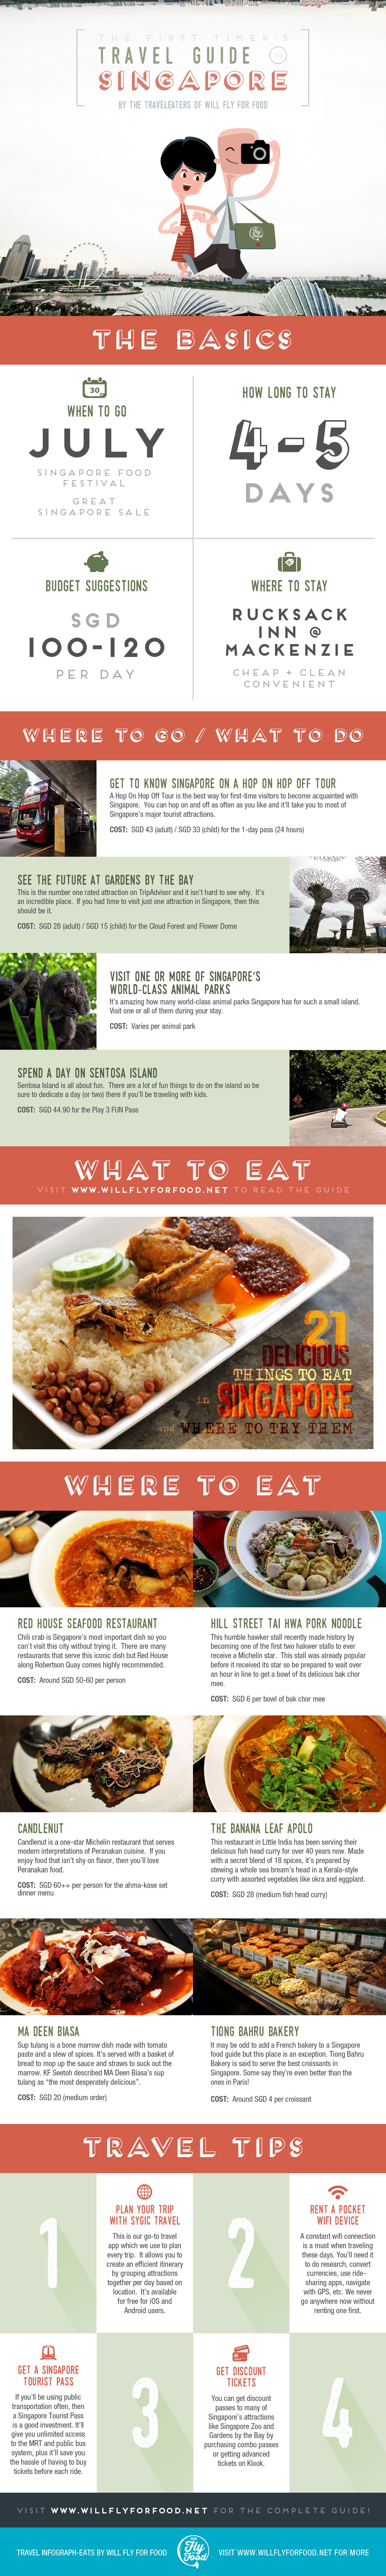 The First-Timer's Travel Guide to Singapore